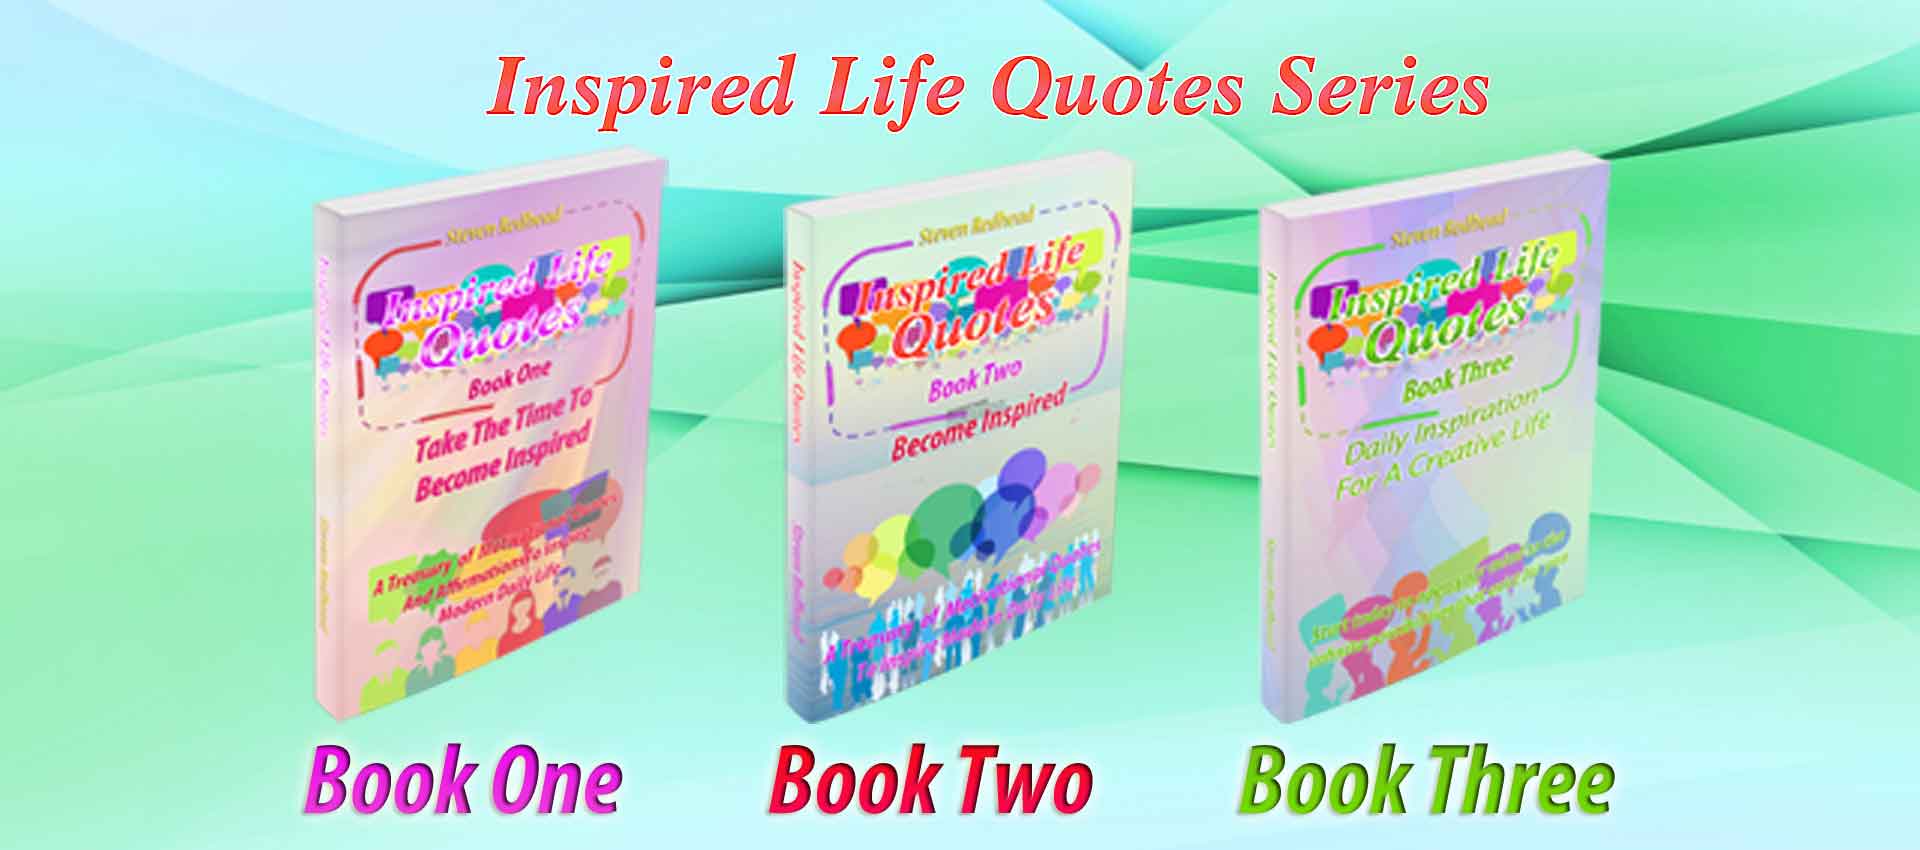 inspired life quotes book series by steven redhead